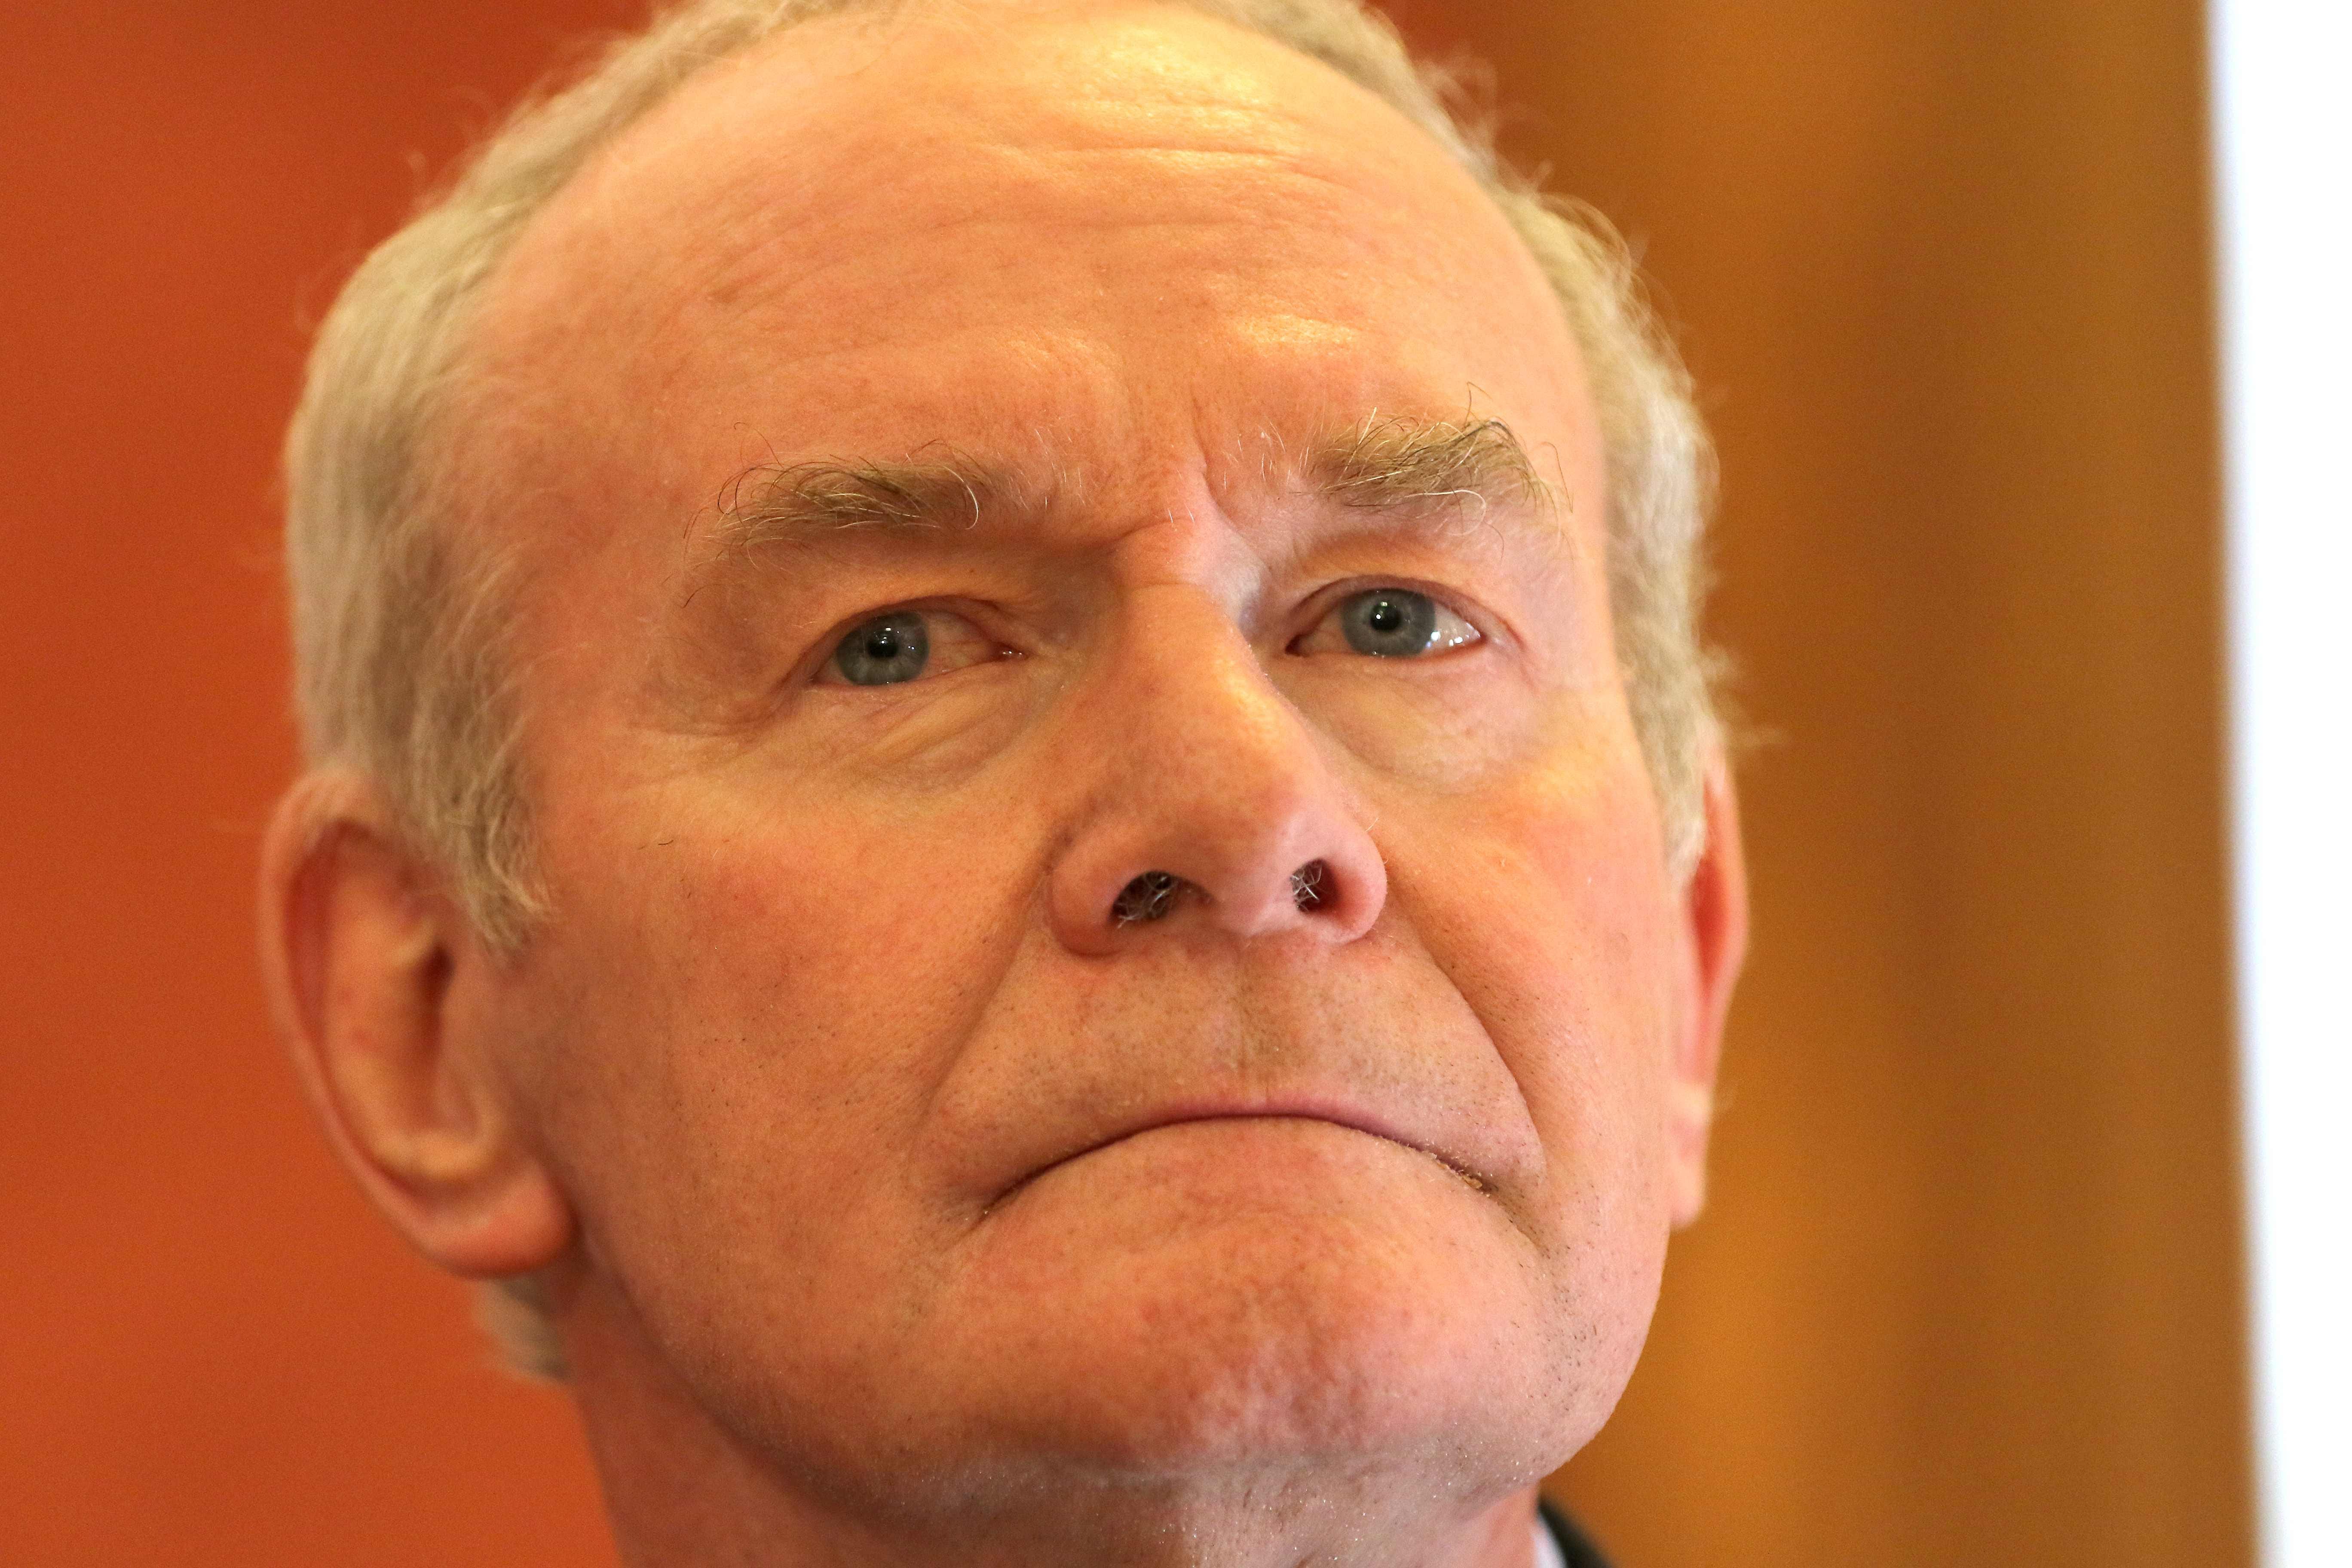 Martin McGuinness, Irish Republican Army commander turned peacemaker, dies at 66